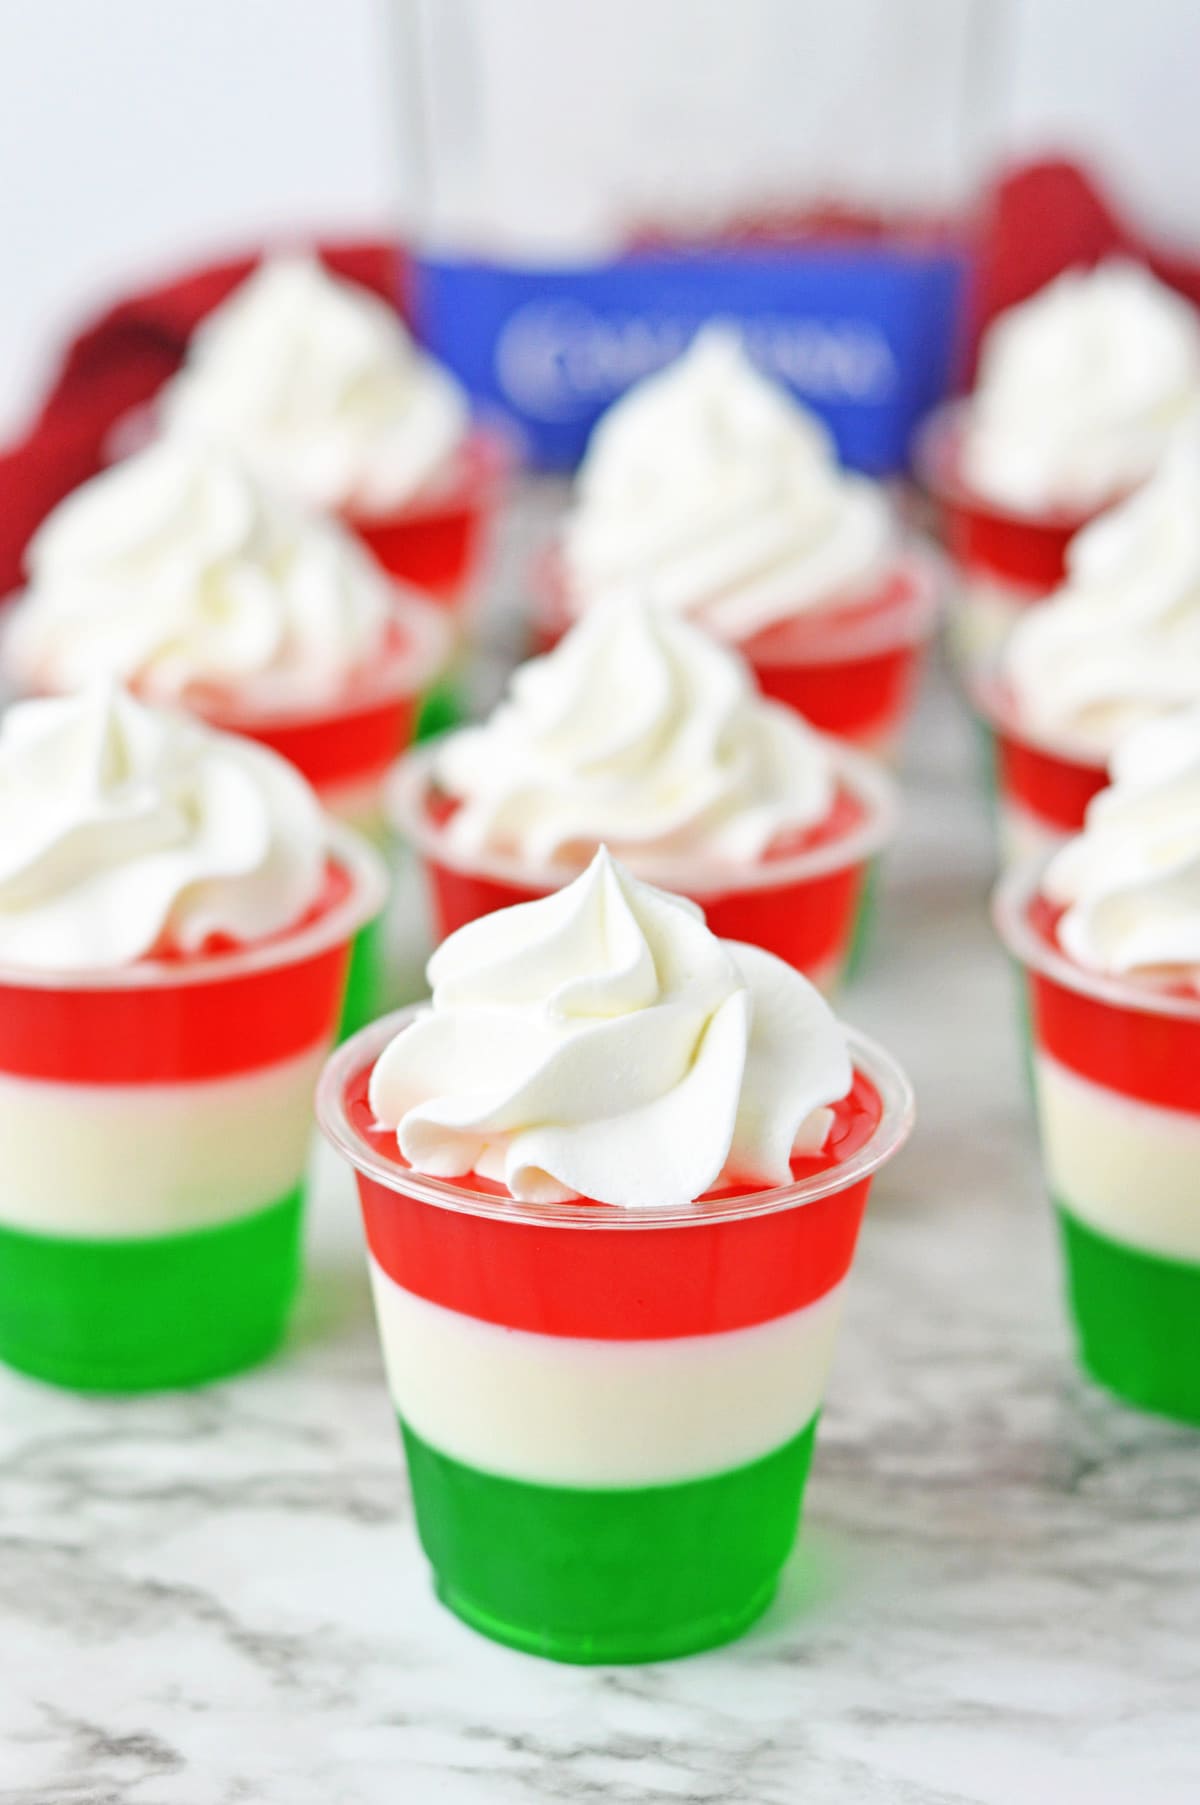 Mexican flag jello shots with whipped cream